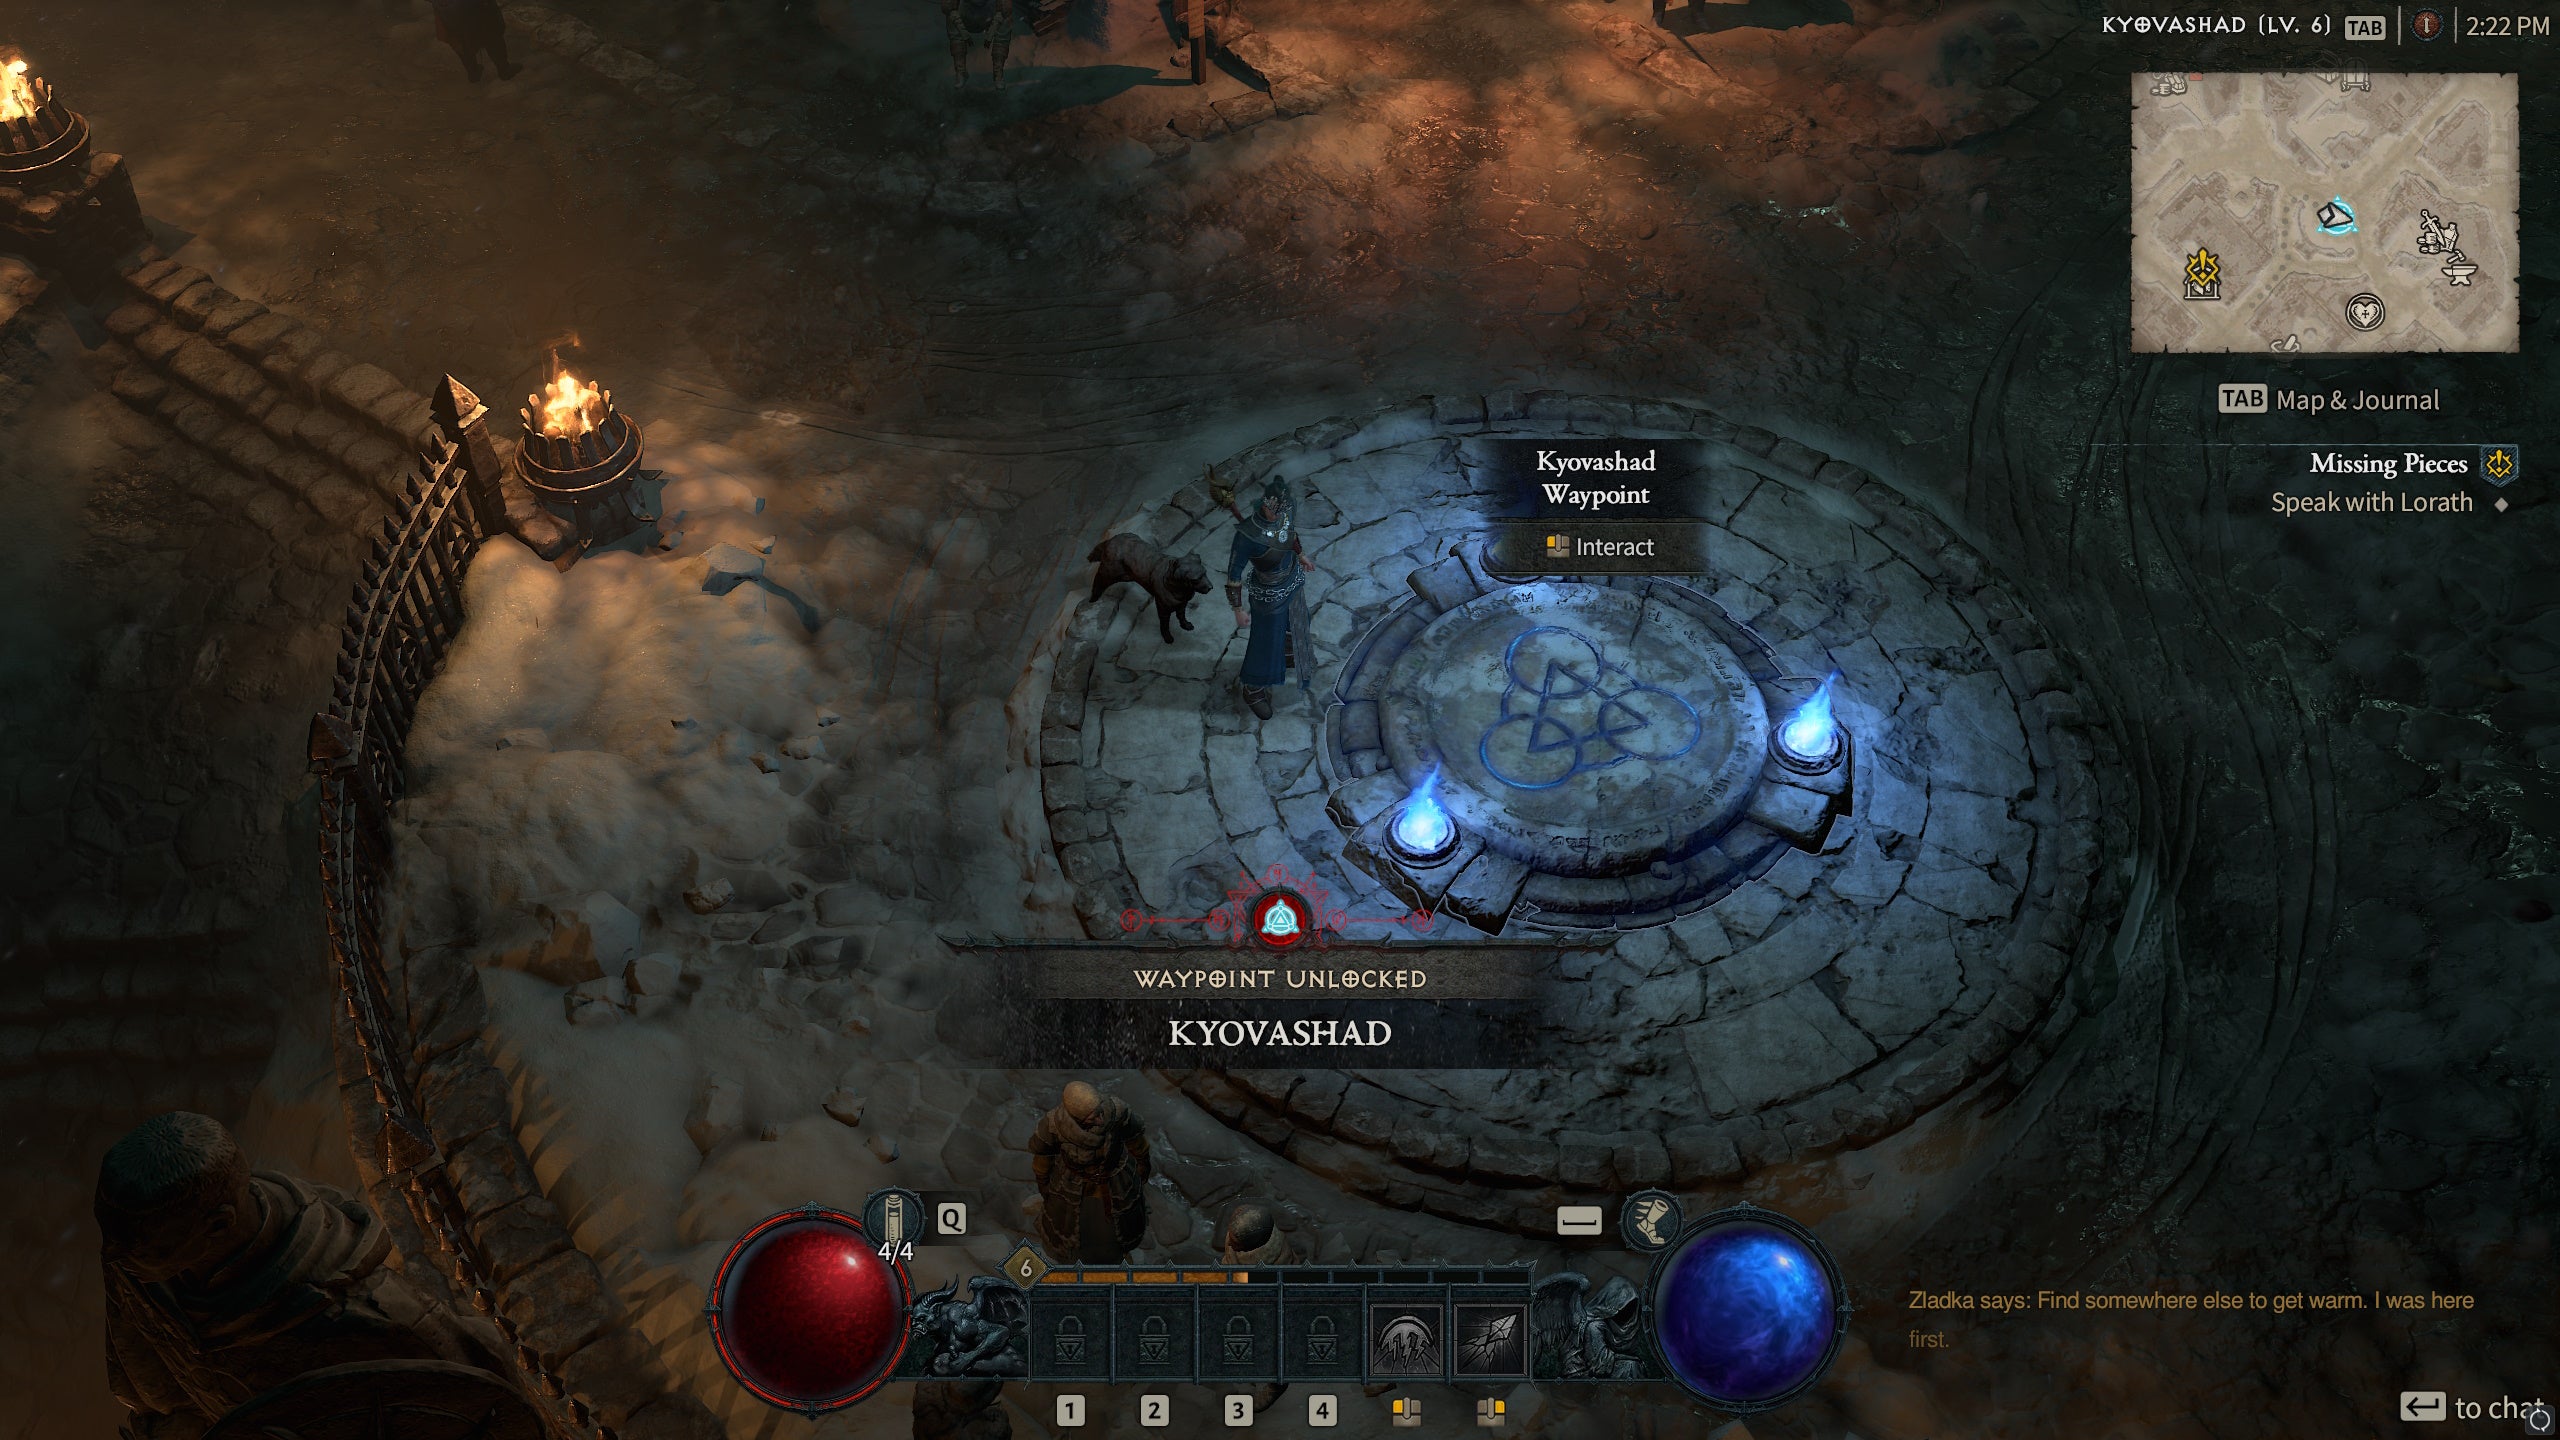 Diablo 4 waypoints: A man with green hair in a ponytail, wearing a hide vest and hide trousers, is standing next to a circle. Soft blue candlelight illuminates triangles, circles, and other symbols inscribed in the stone